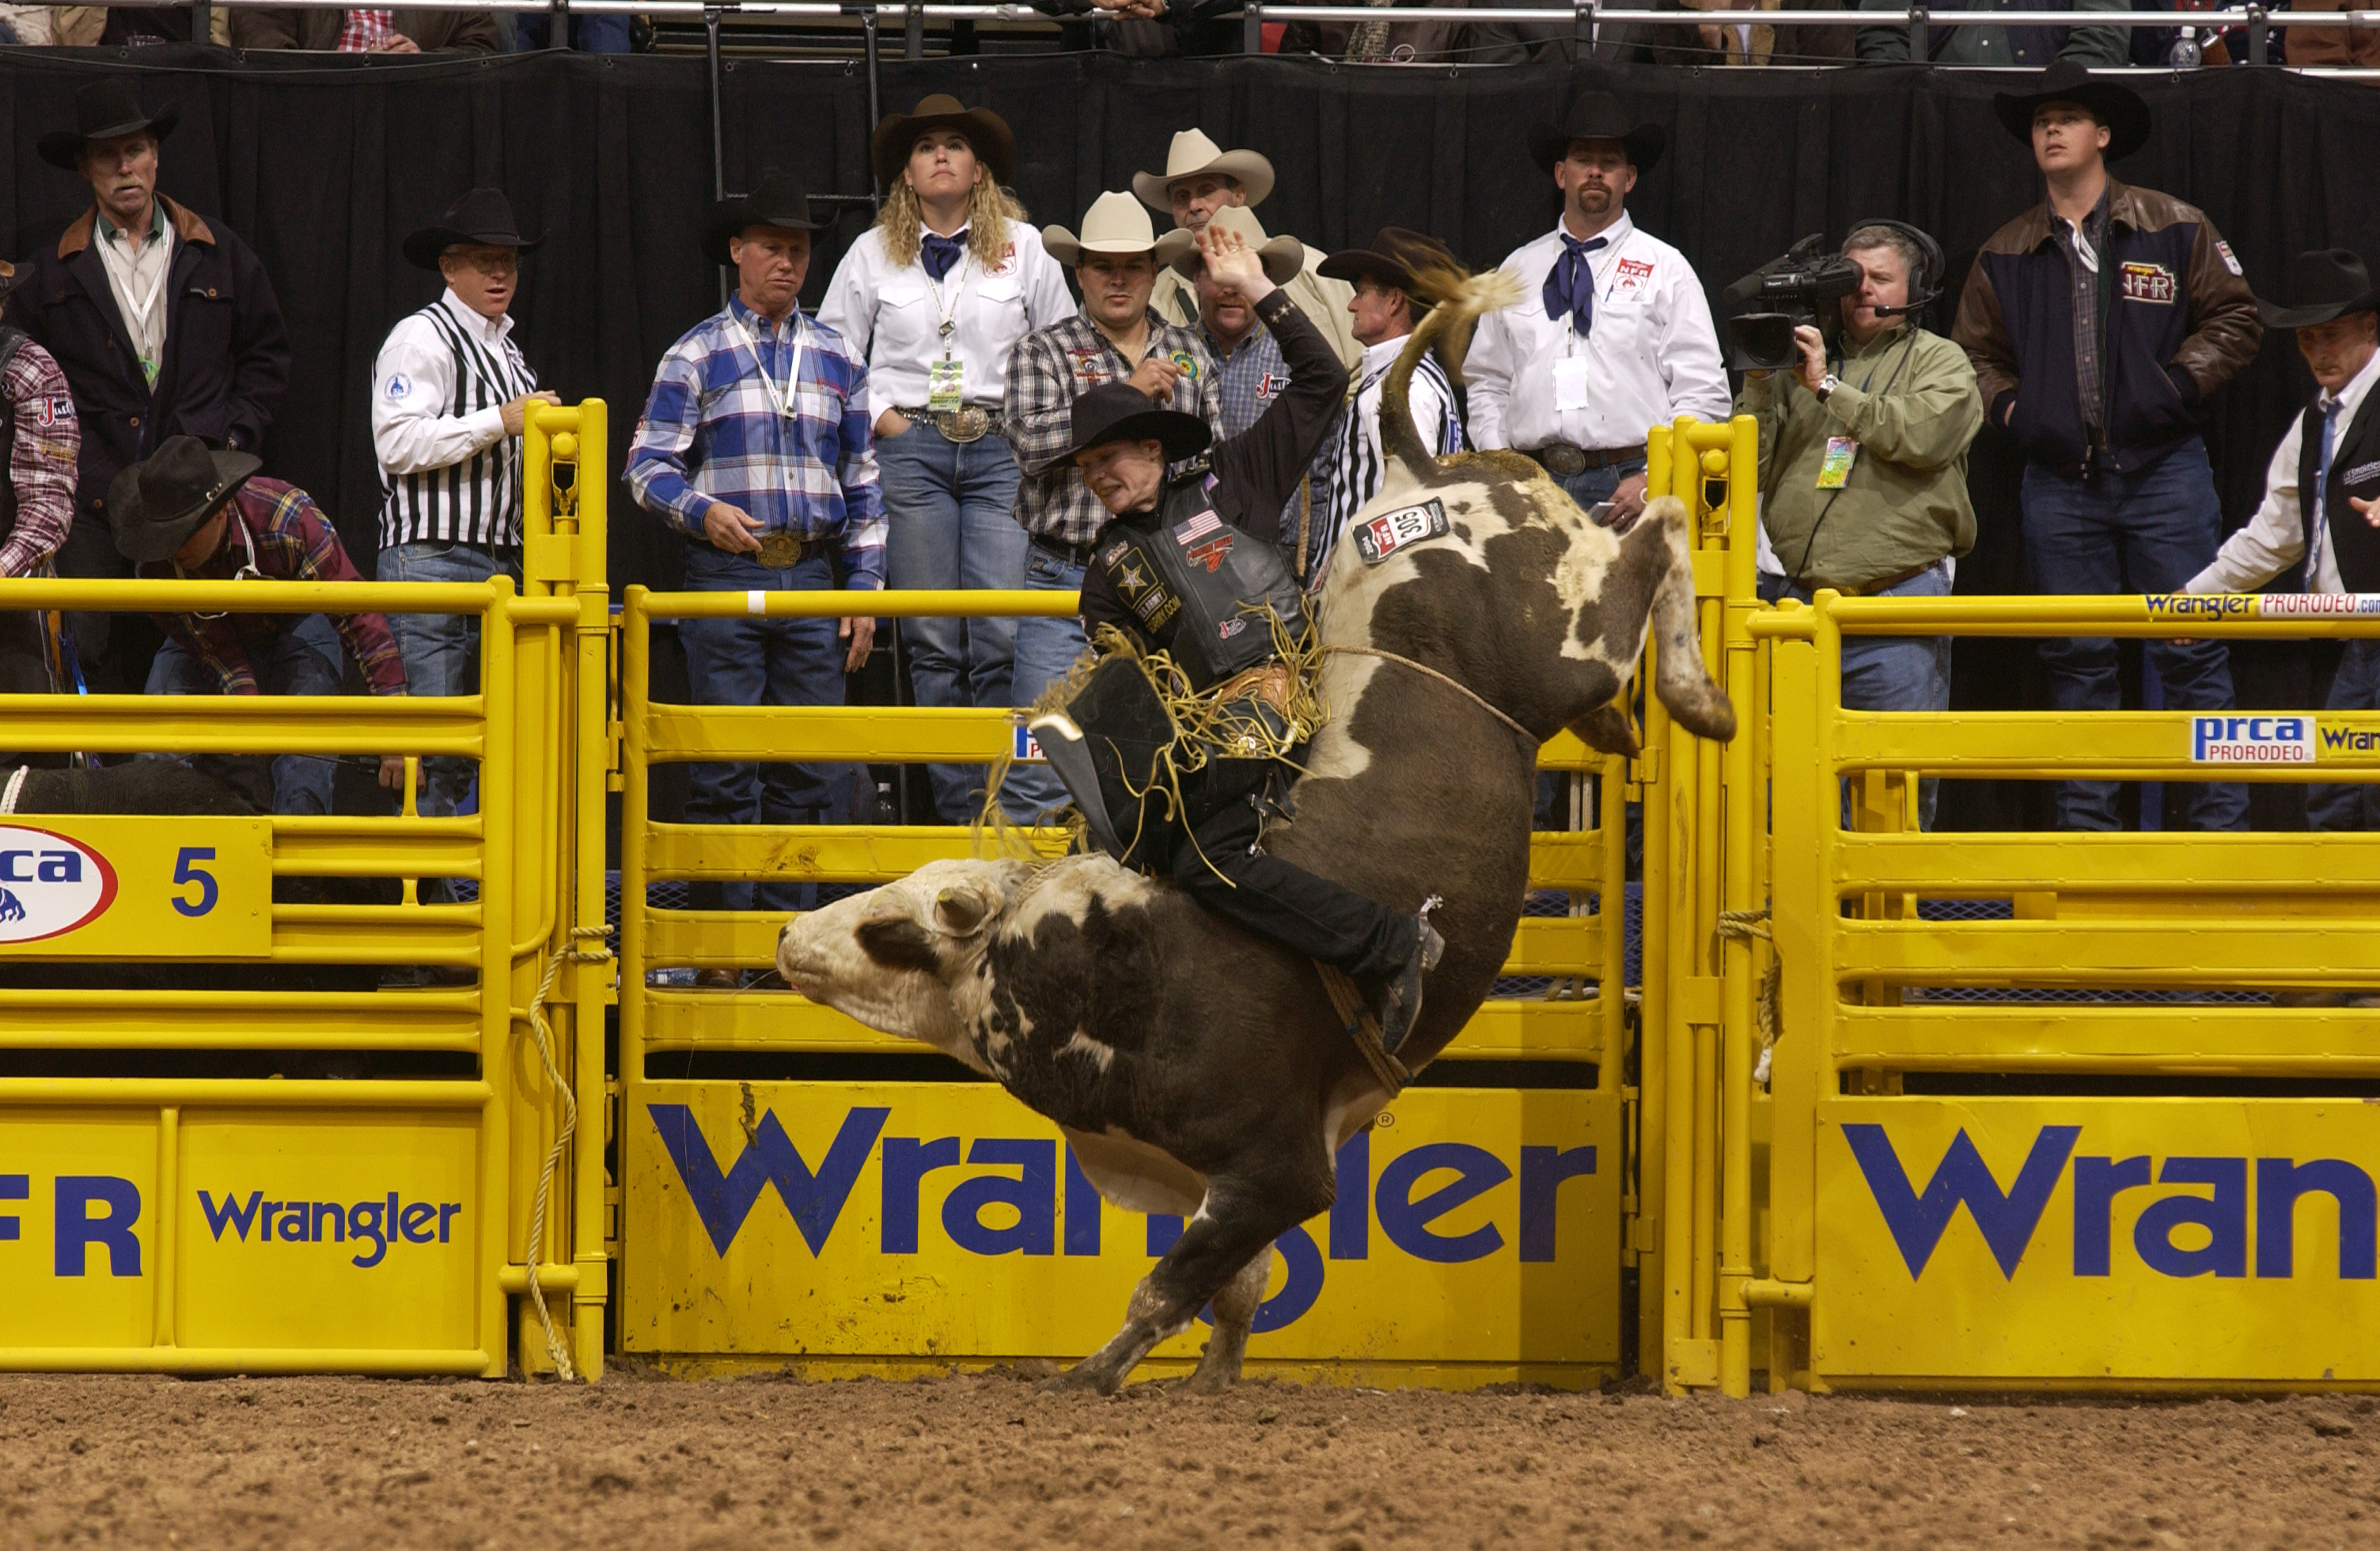 Bull rider sees red | The Spokesman-Review